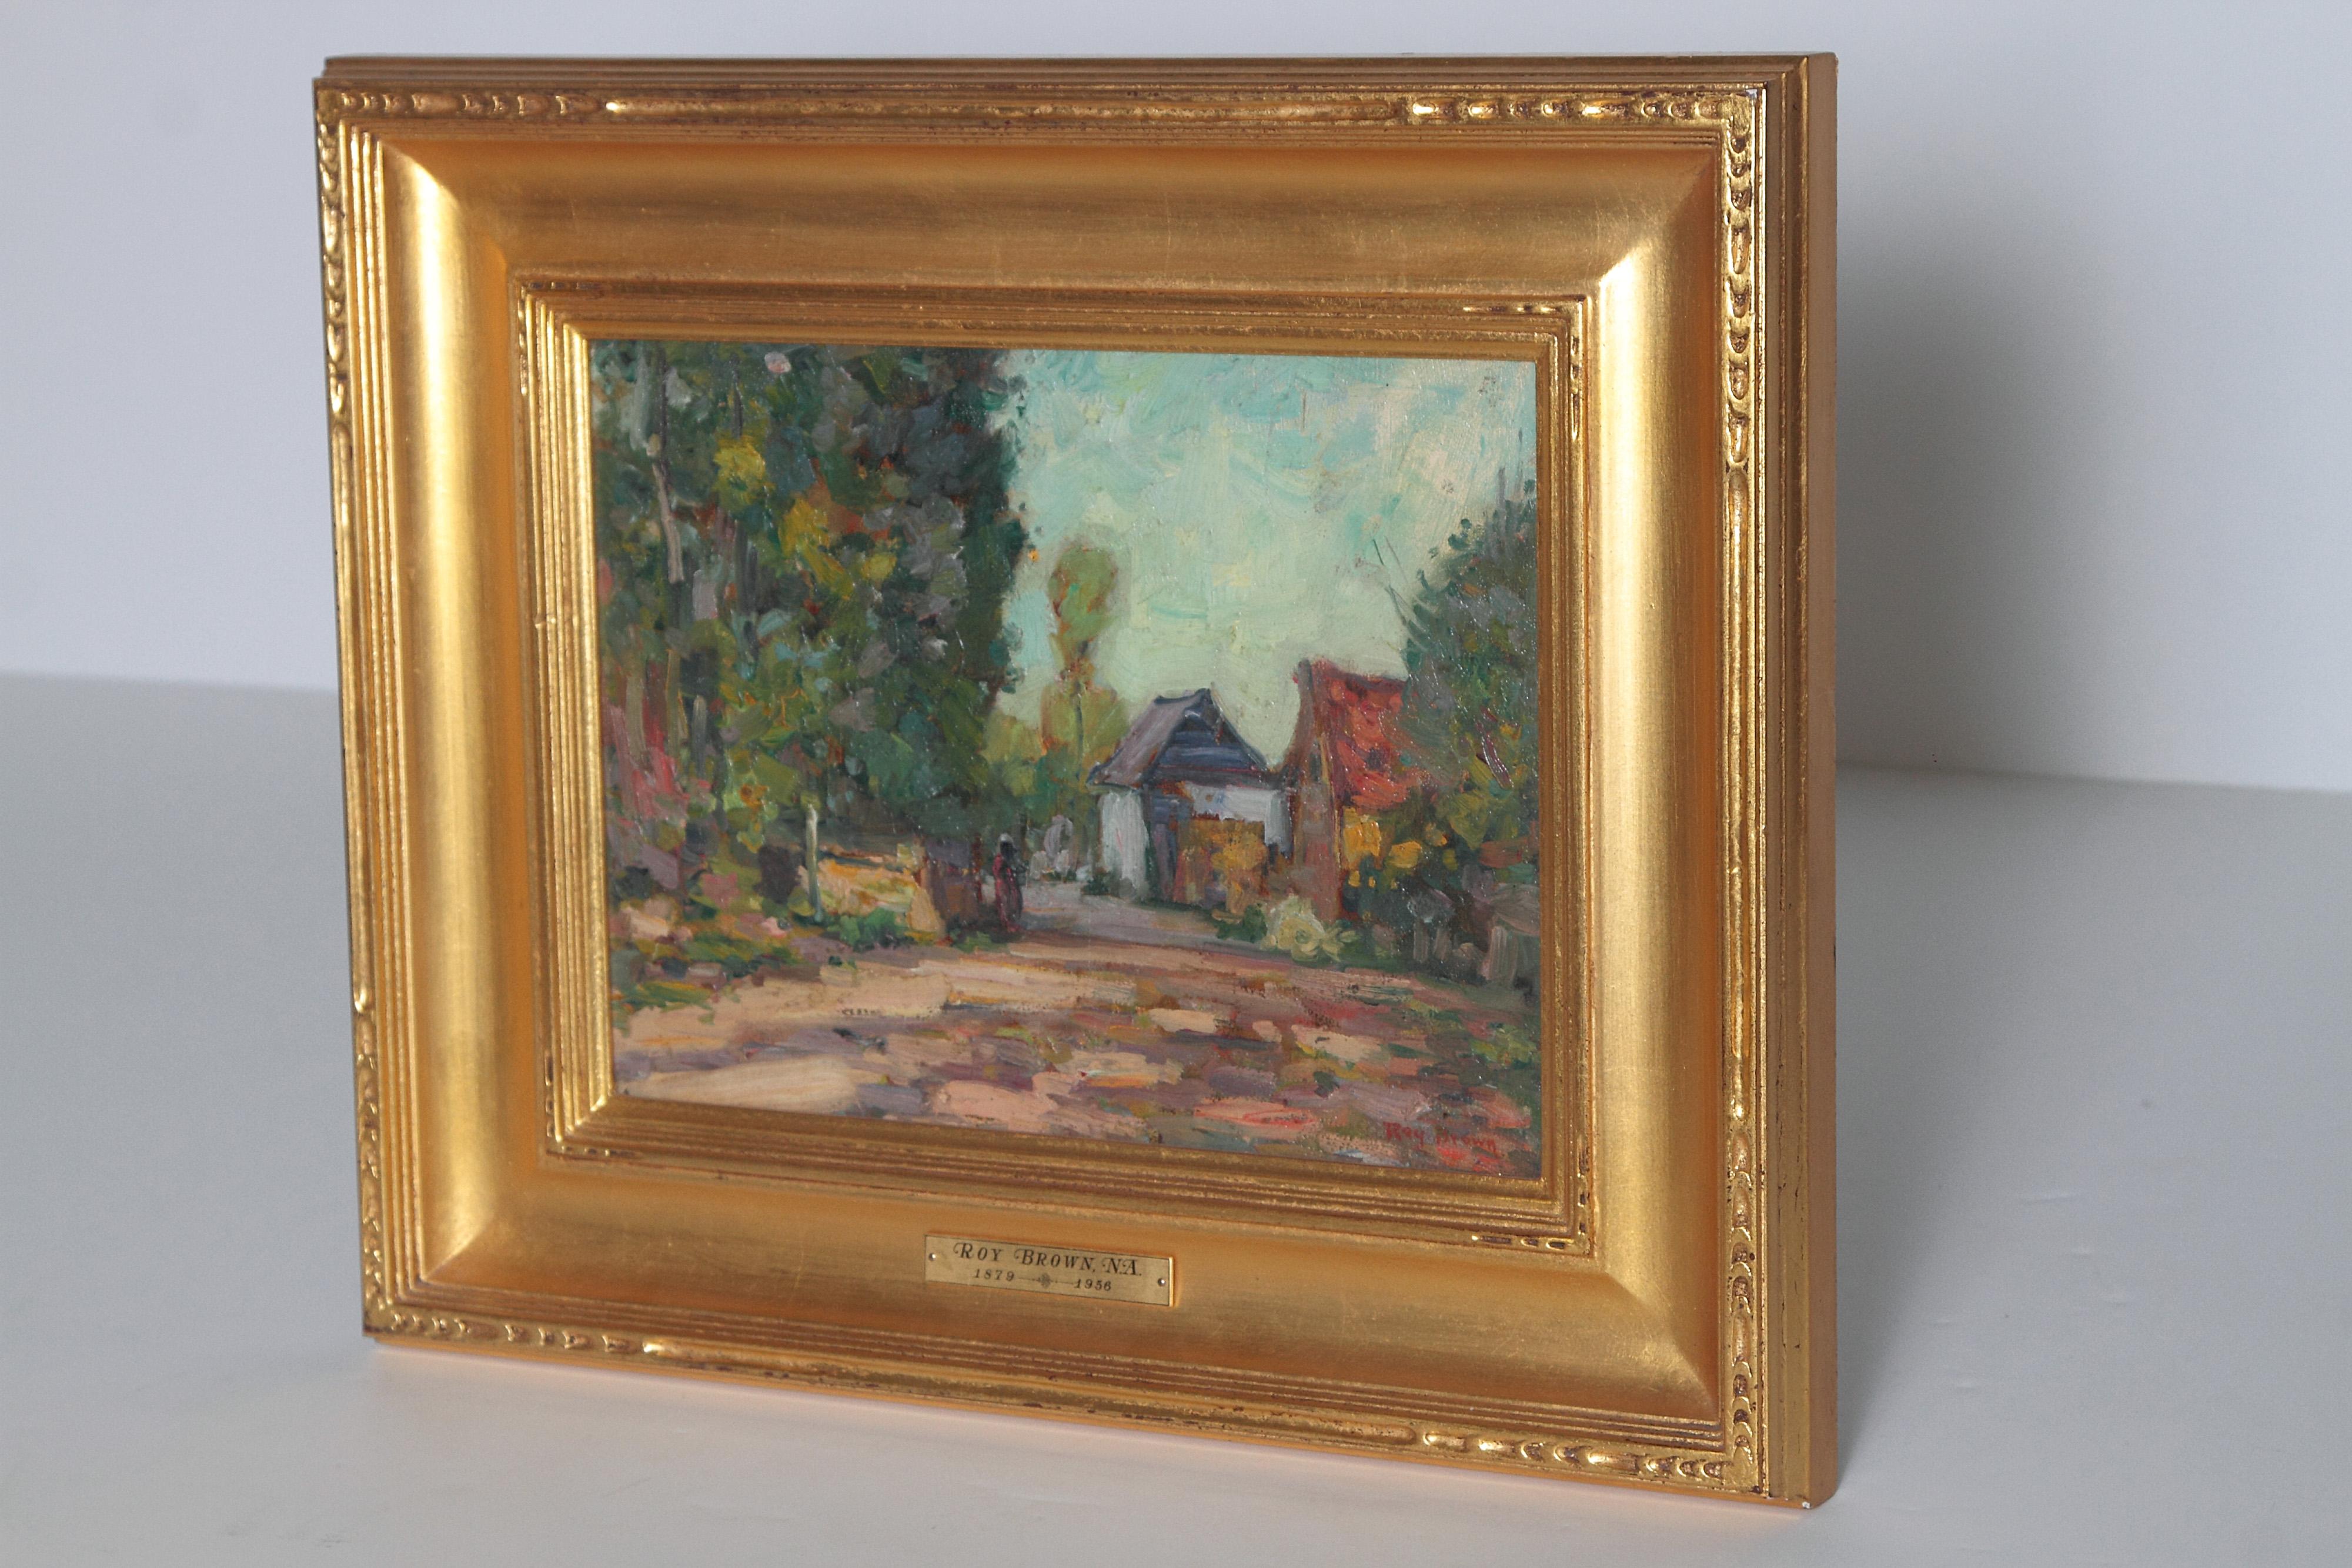 An impressionistic view of a shady street with two houses. By American artist Roy Brown, 1879-1956. He painted extensively in New York and Europe. He is represented in a variety of museums, Signed lower right corner. Image measures: 13.75